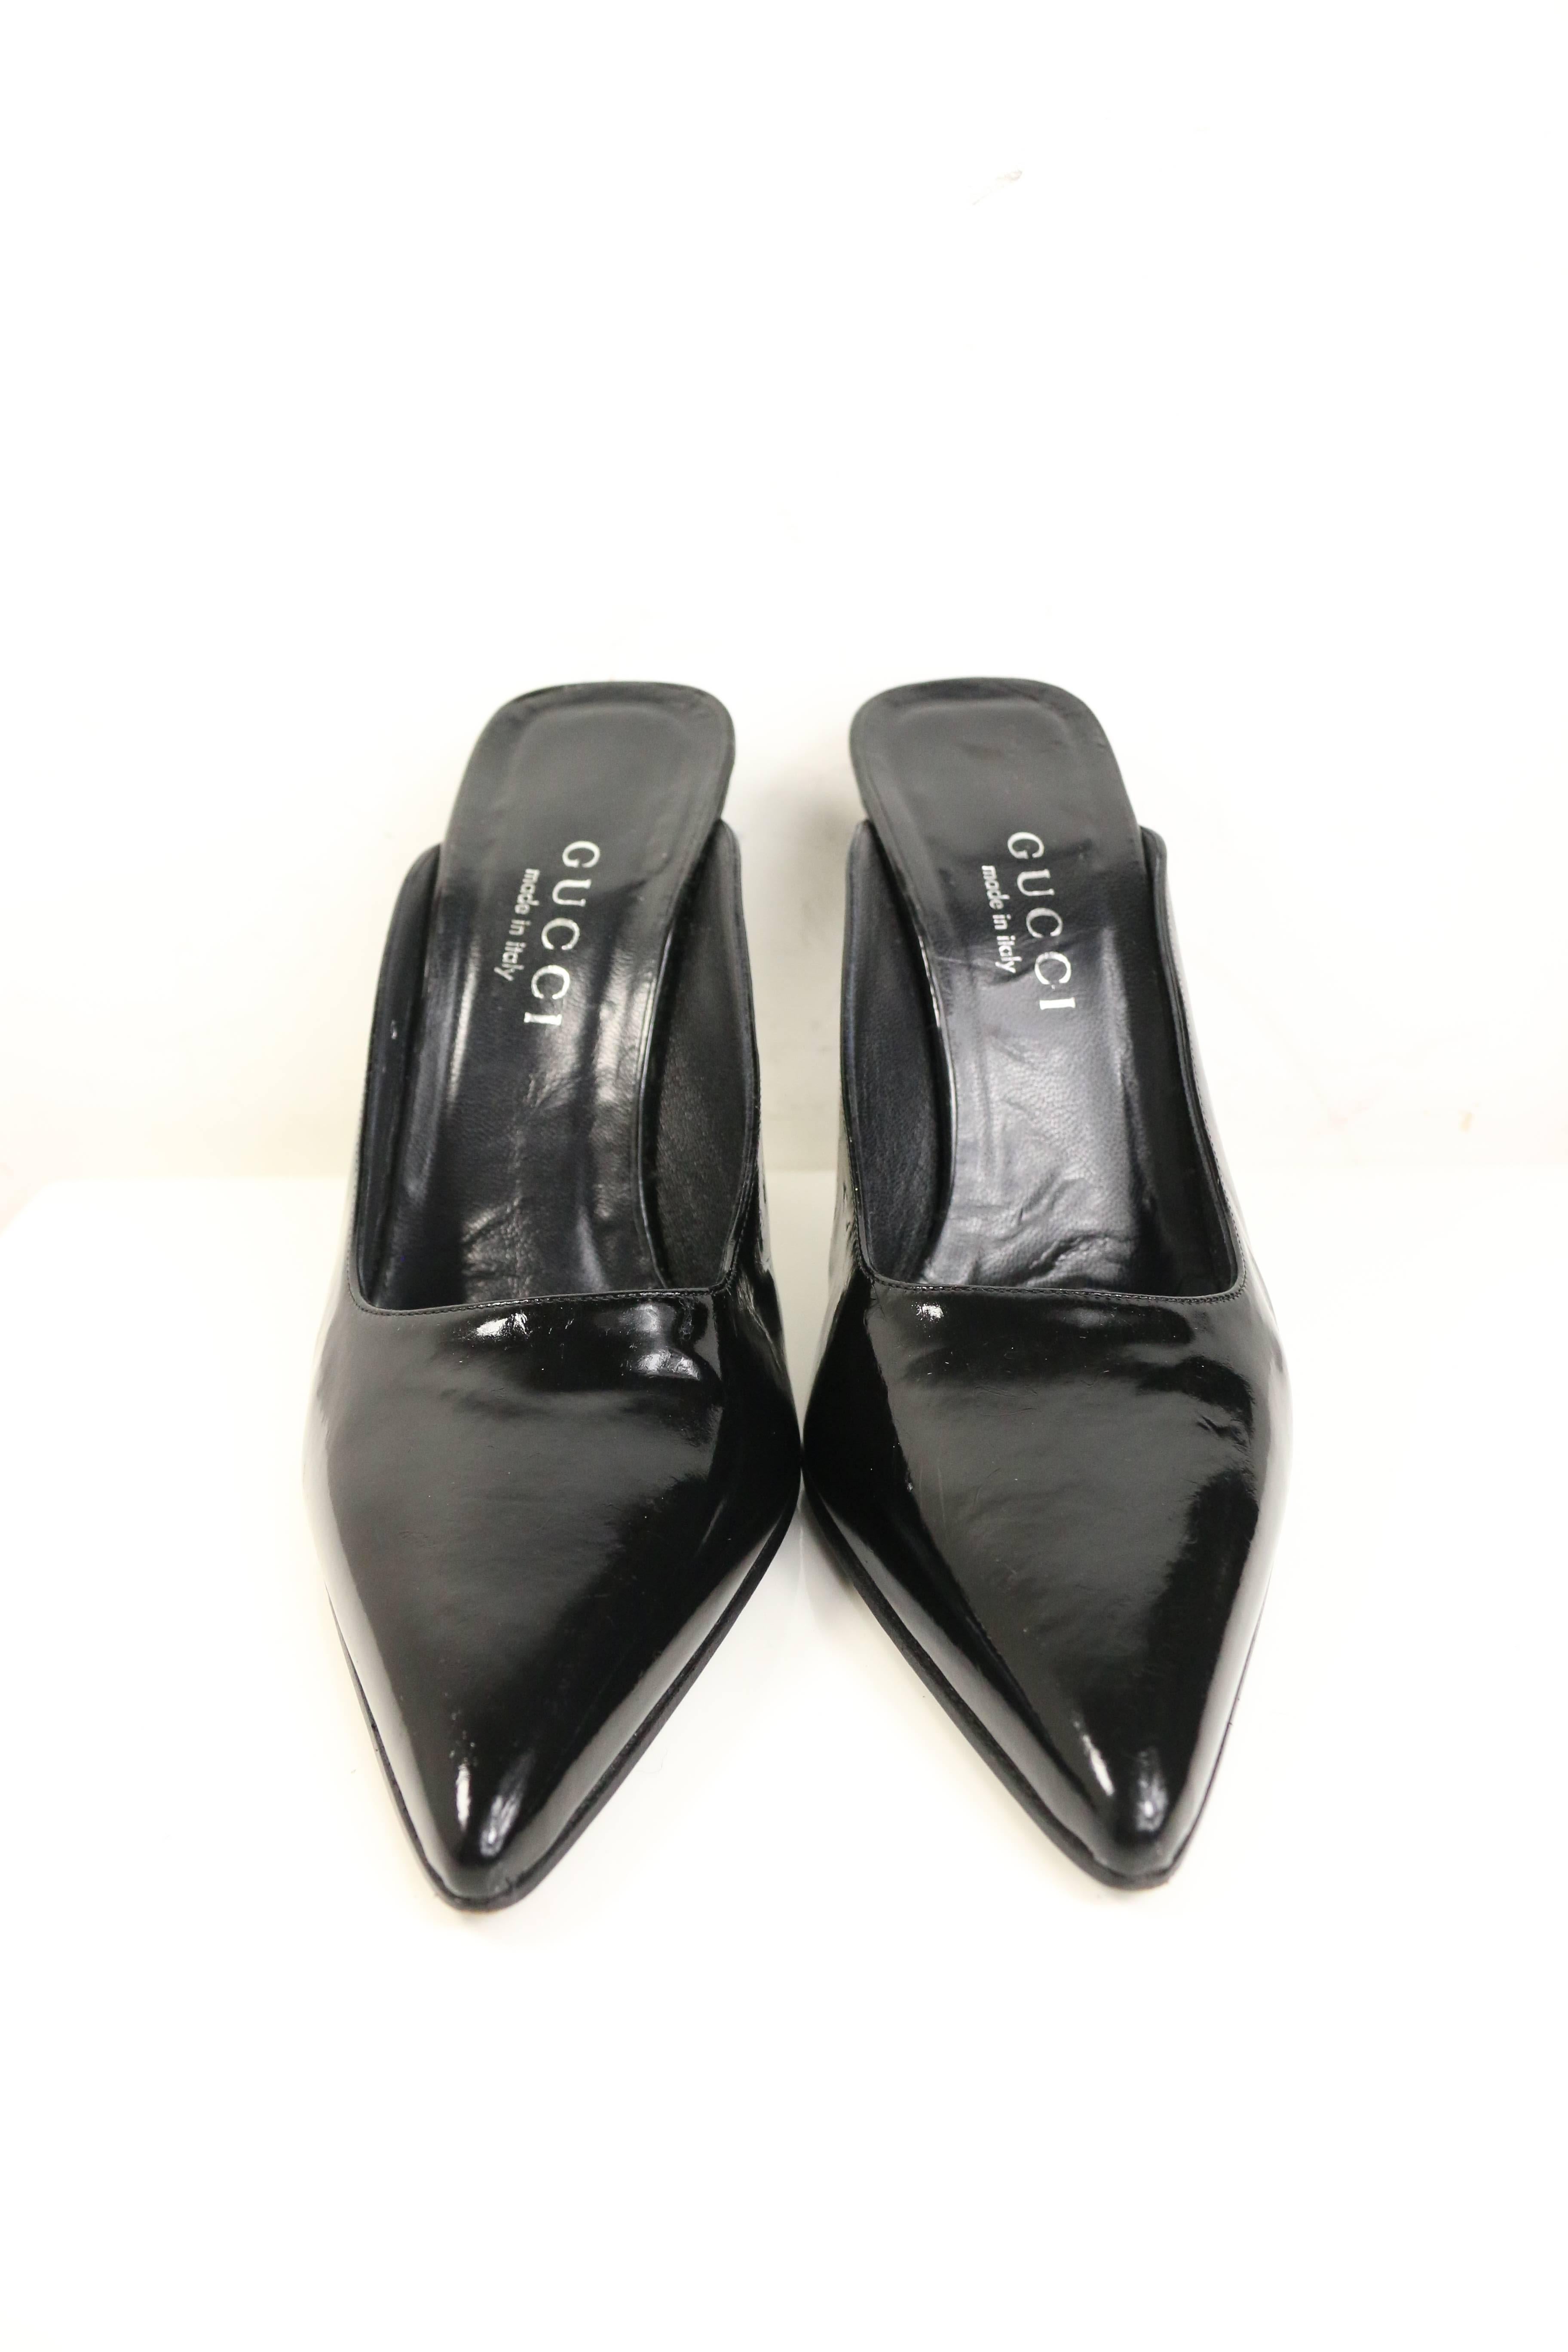 - Gucci by Tom Ford black patent leather pointy mules with silver metal heels from spring 1997 collection. 

- Made in Italy. 

- Size 38. 